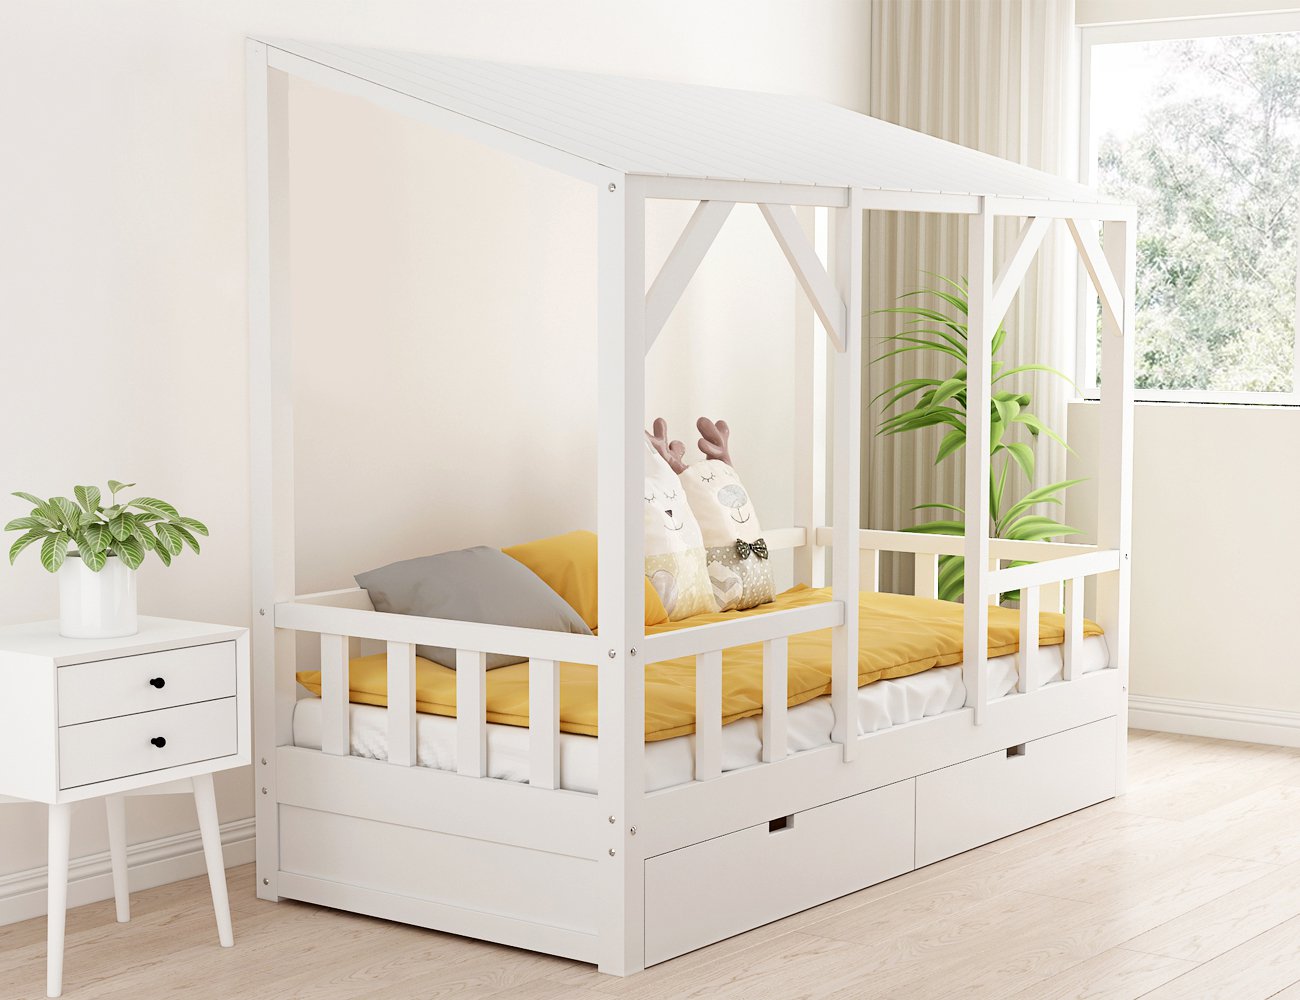 single bed frame and mattress amazon